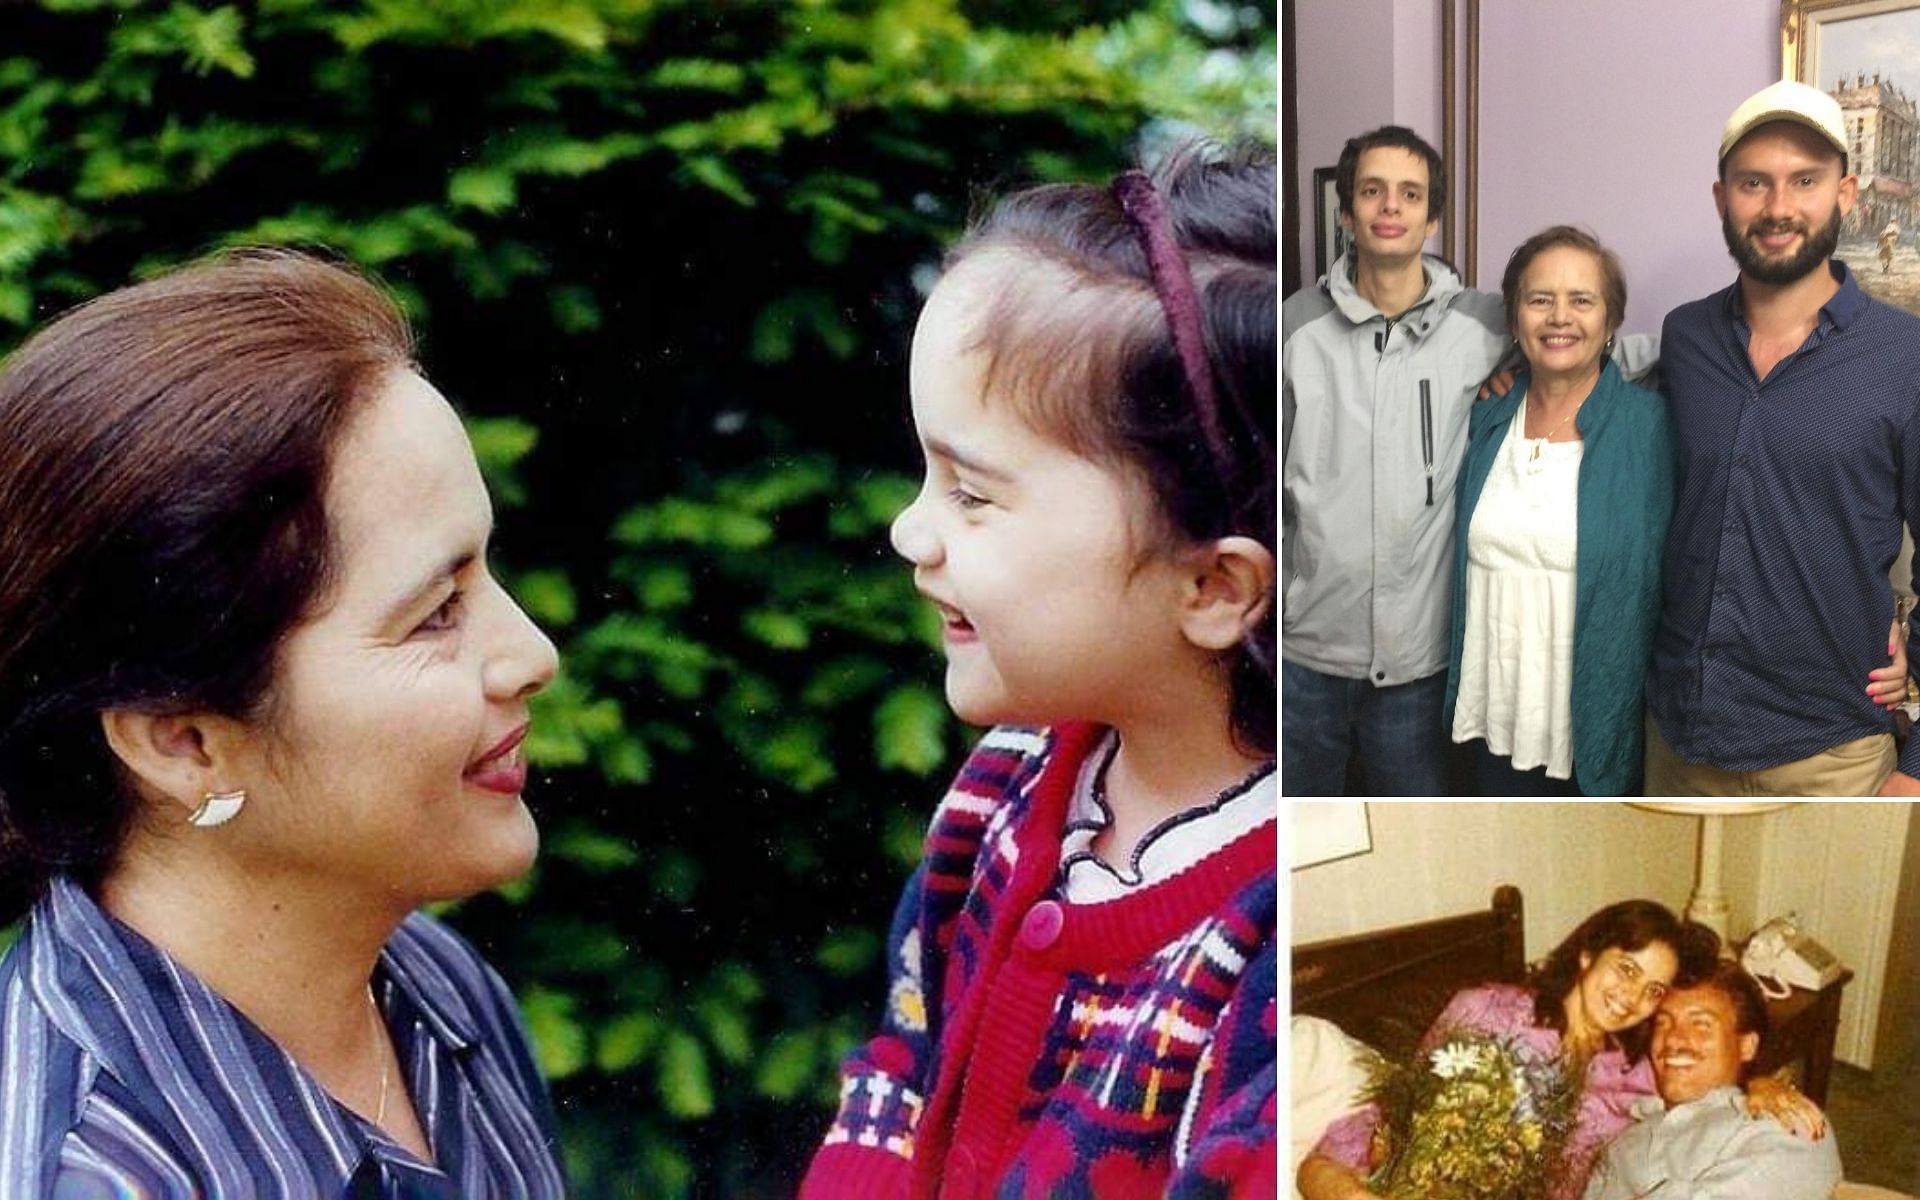 Nohema Graber pictured with her family in photos through the years (Image via Nohema Marie Graber, Christian Graber/ Facebook)